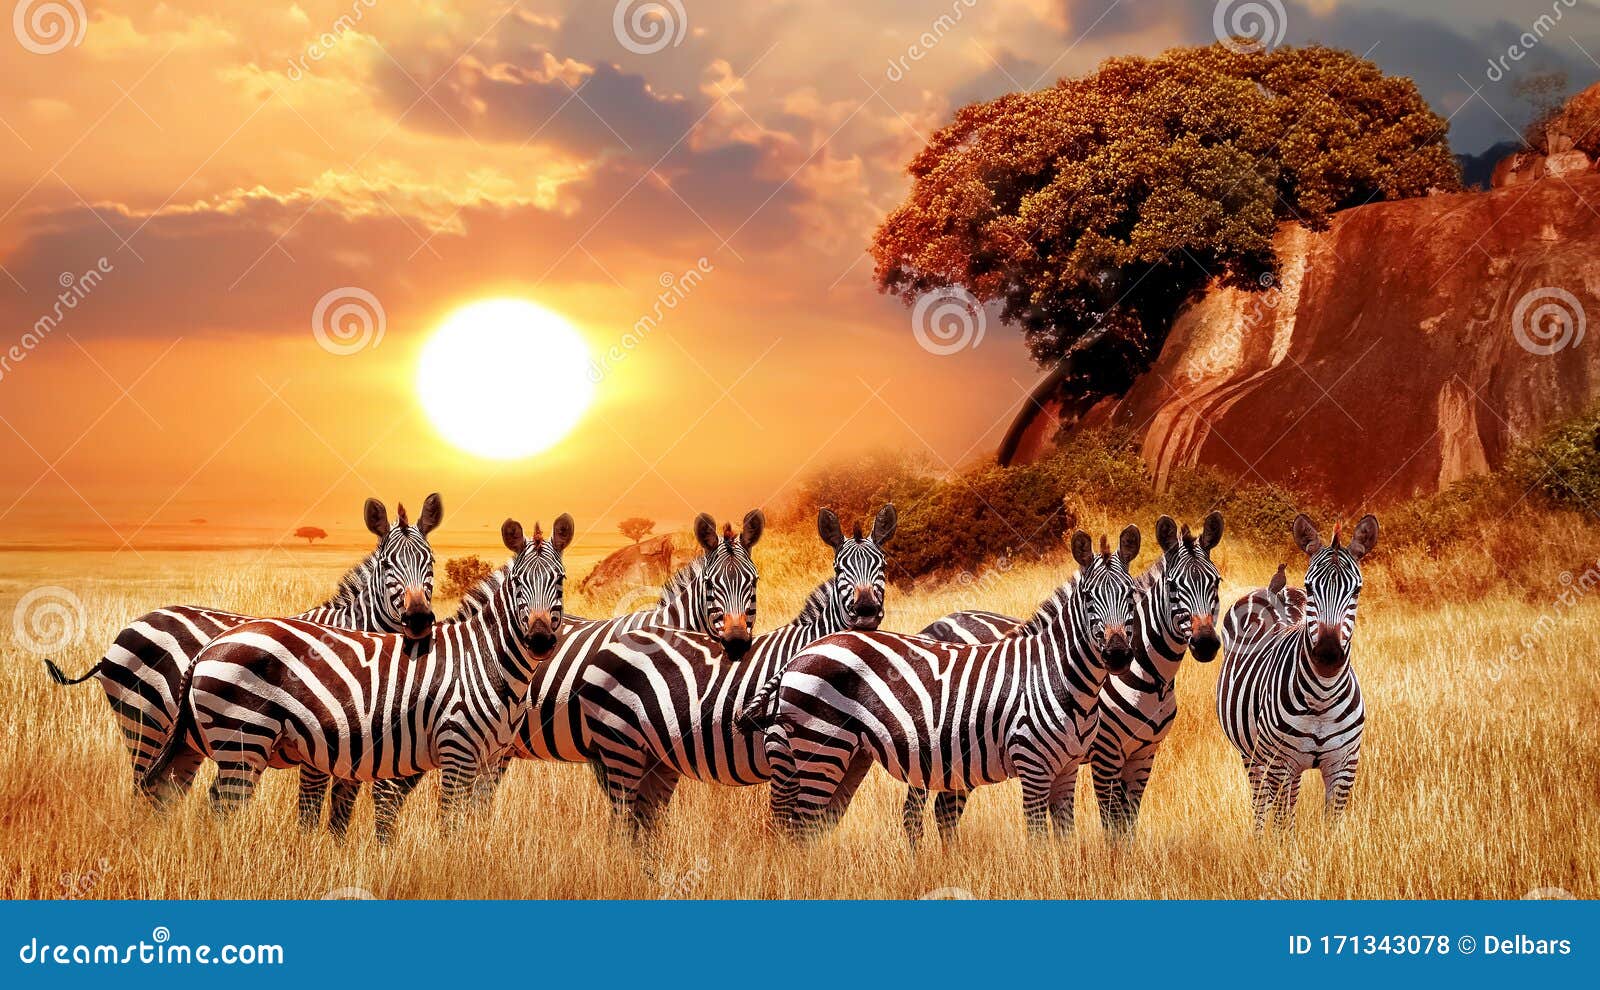 Zebras Group In The African Savanna Against The Beautiful Sunset Serengeti National Park